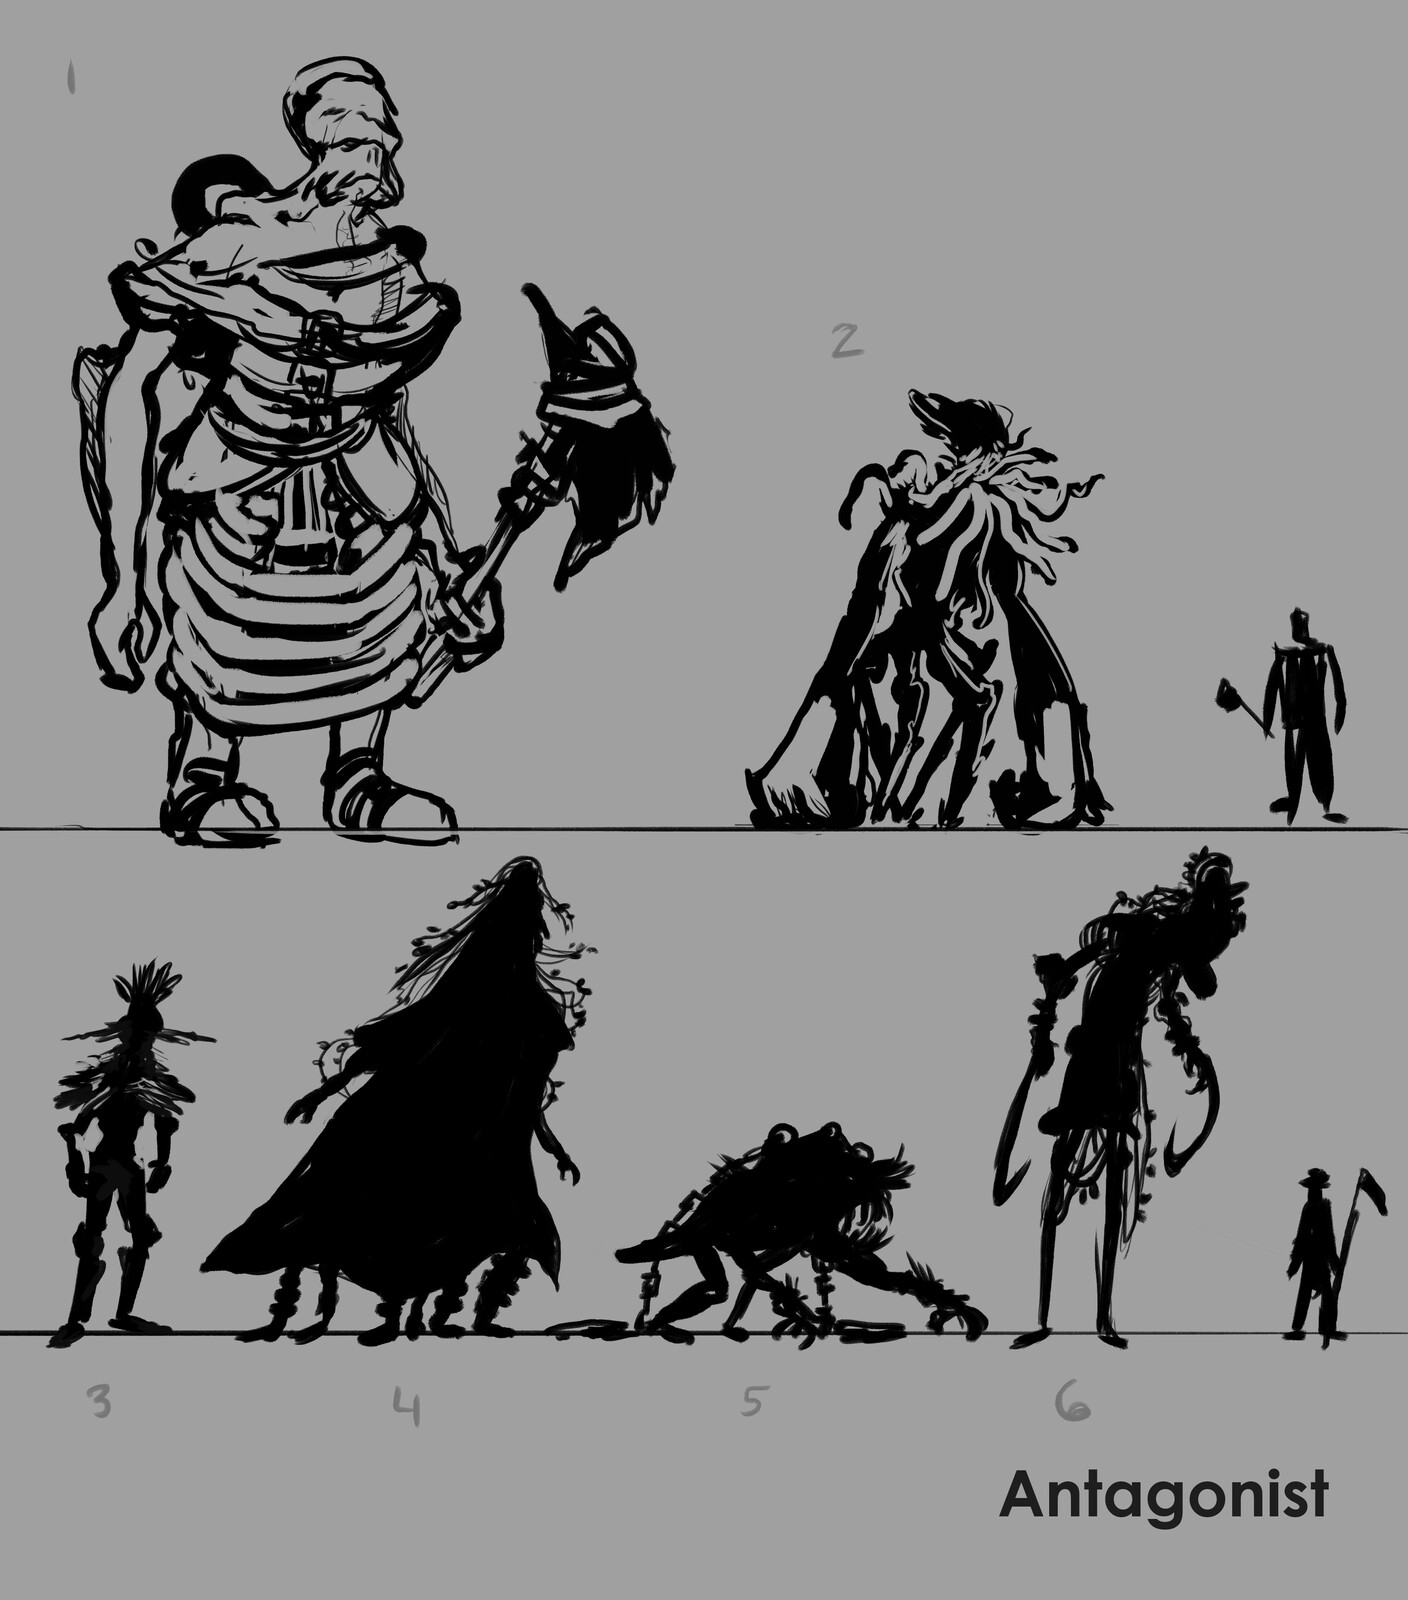 Antagonist/Creature concept sketches and silhouettes.